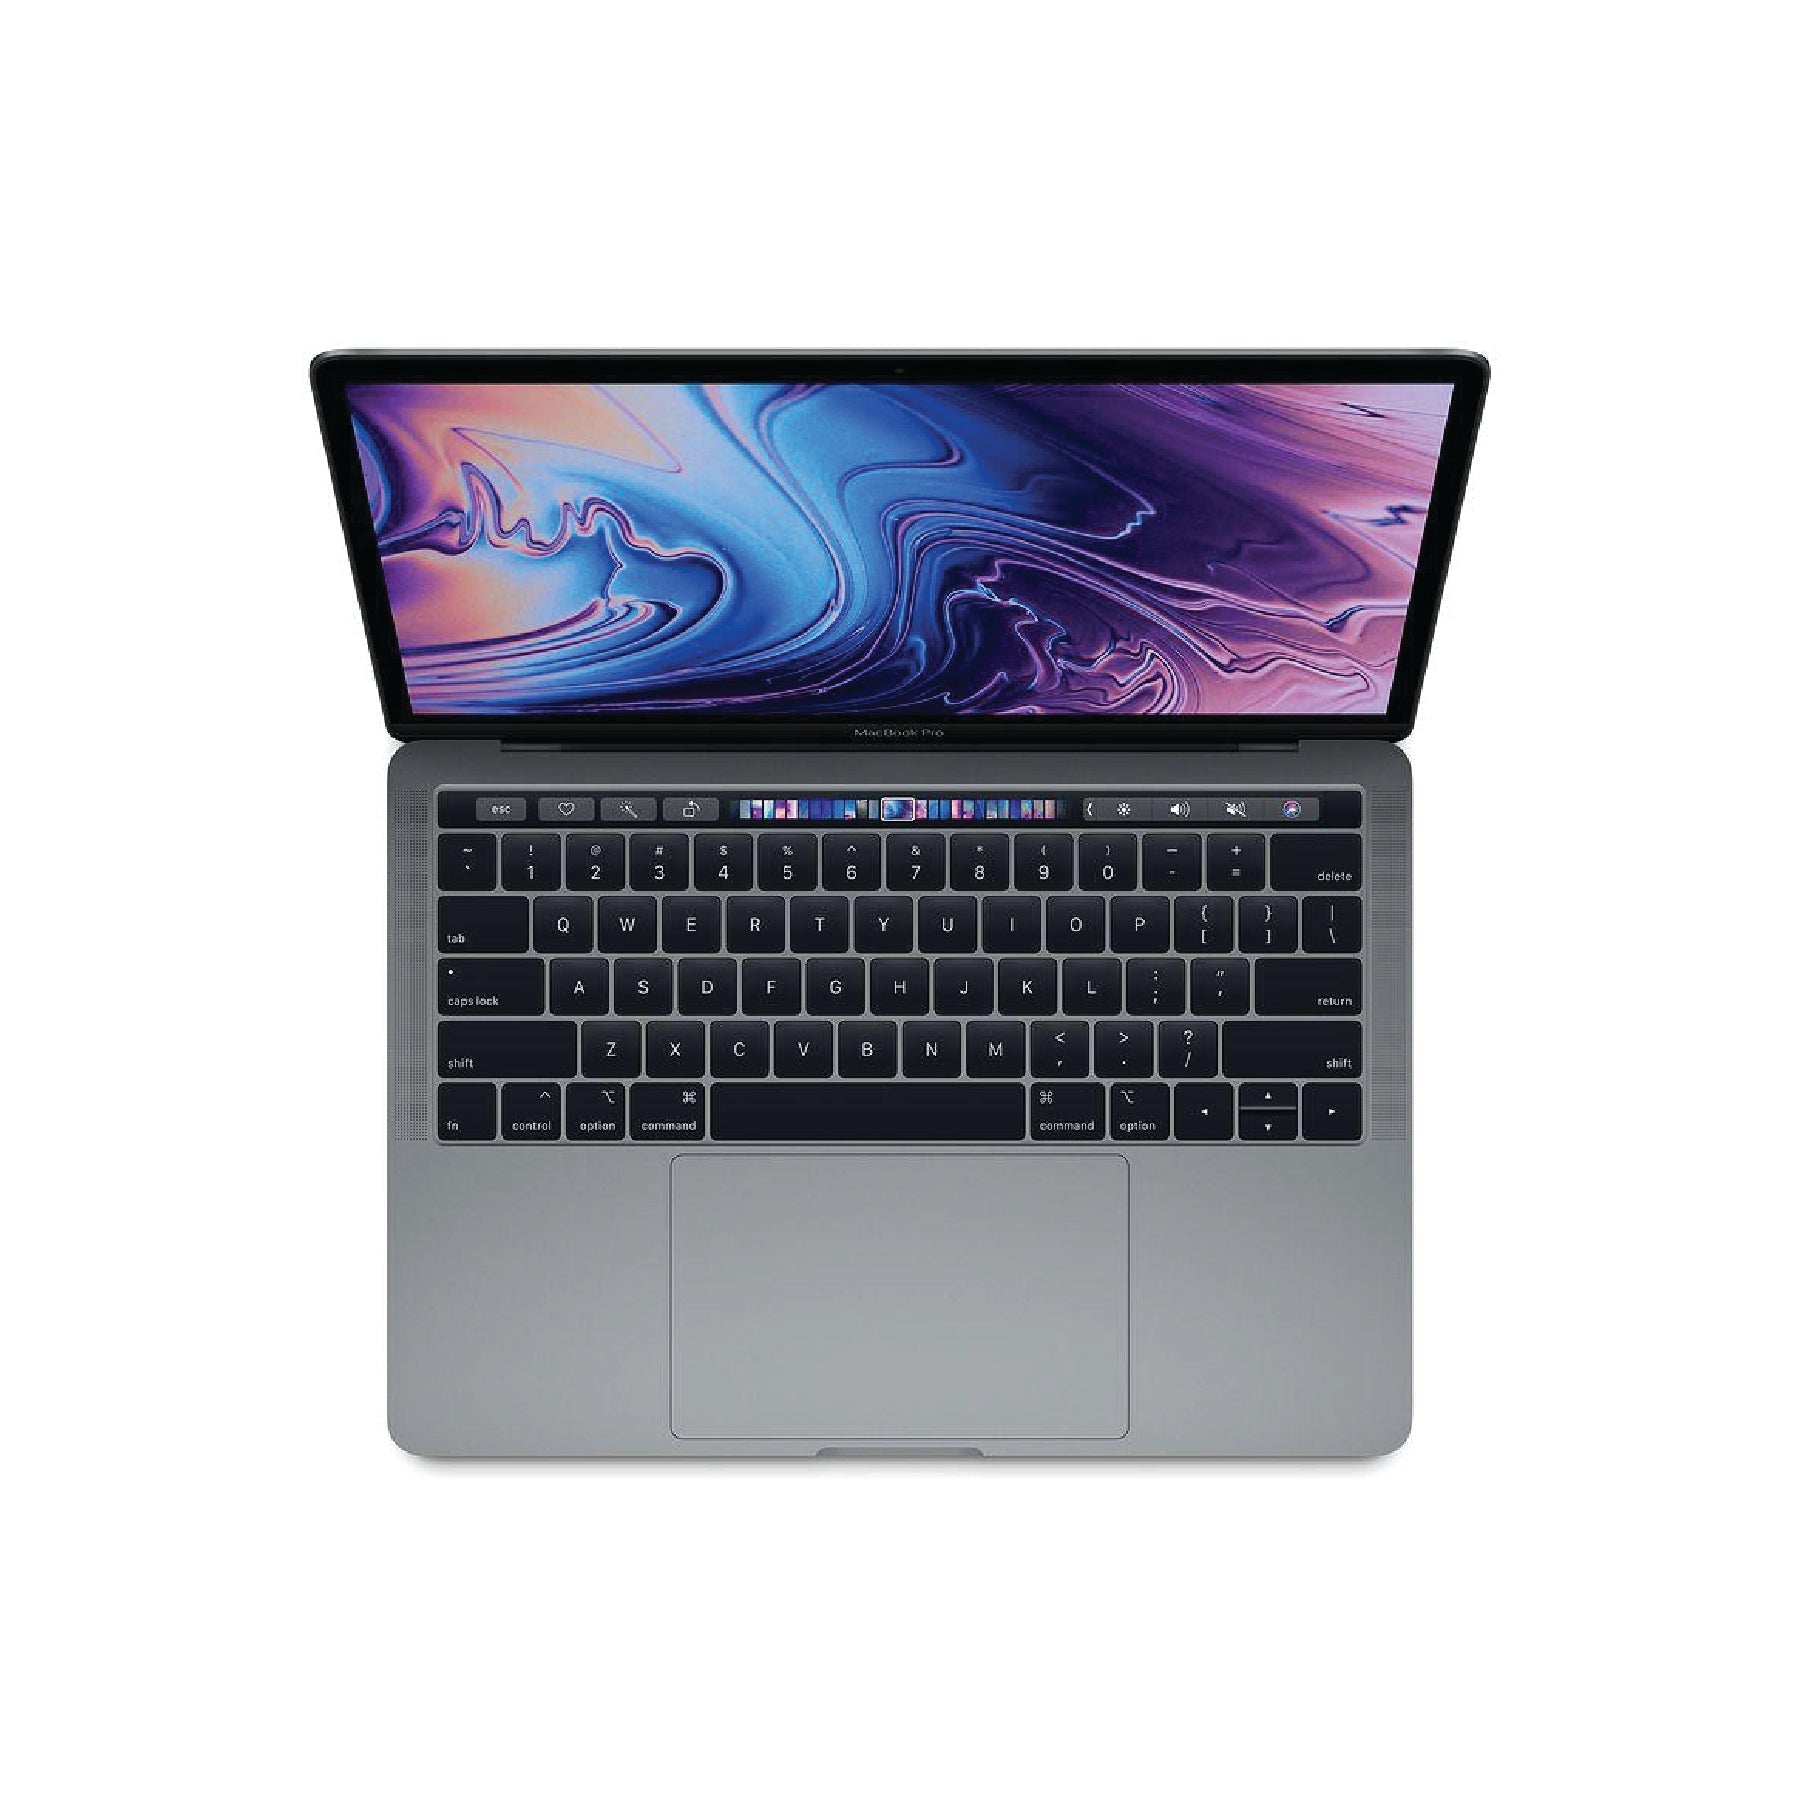 MacBook Pro (13-inch, 2019, Two Thunderbolt 3 ports) 1.4GHz, Intel Core i5, 256GB - Space Grey (Better) - iStore Pre-owned